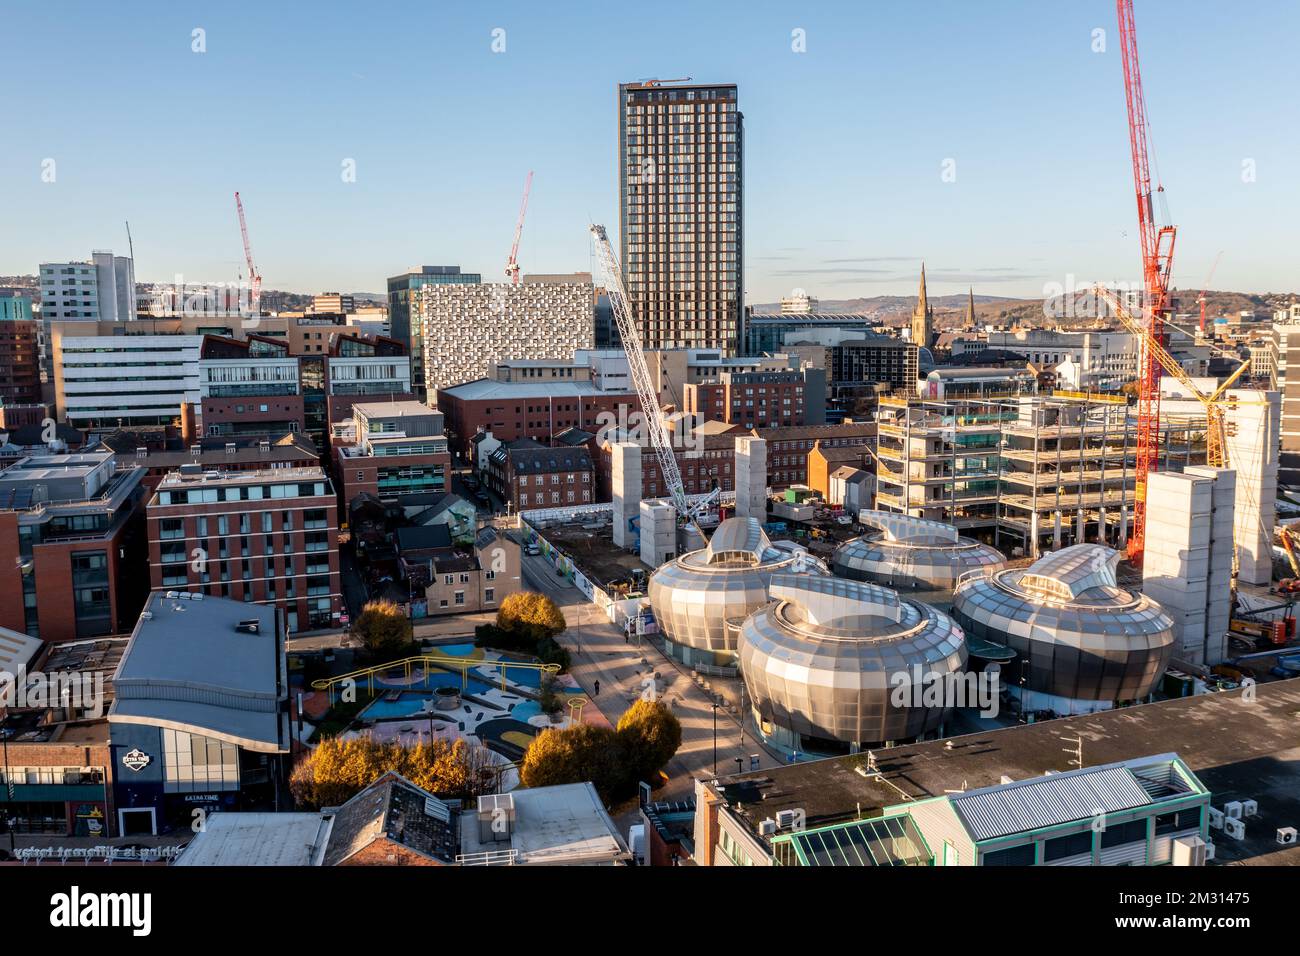 SHEFFIELD, UK - DECEMBER 7, 2022.  An aerial view of Sheffield Hallam University Students' Union buildings known as The Hubs in the centre of Sheffiel Stock Photo